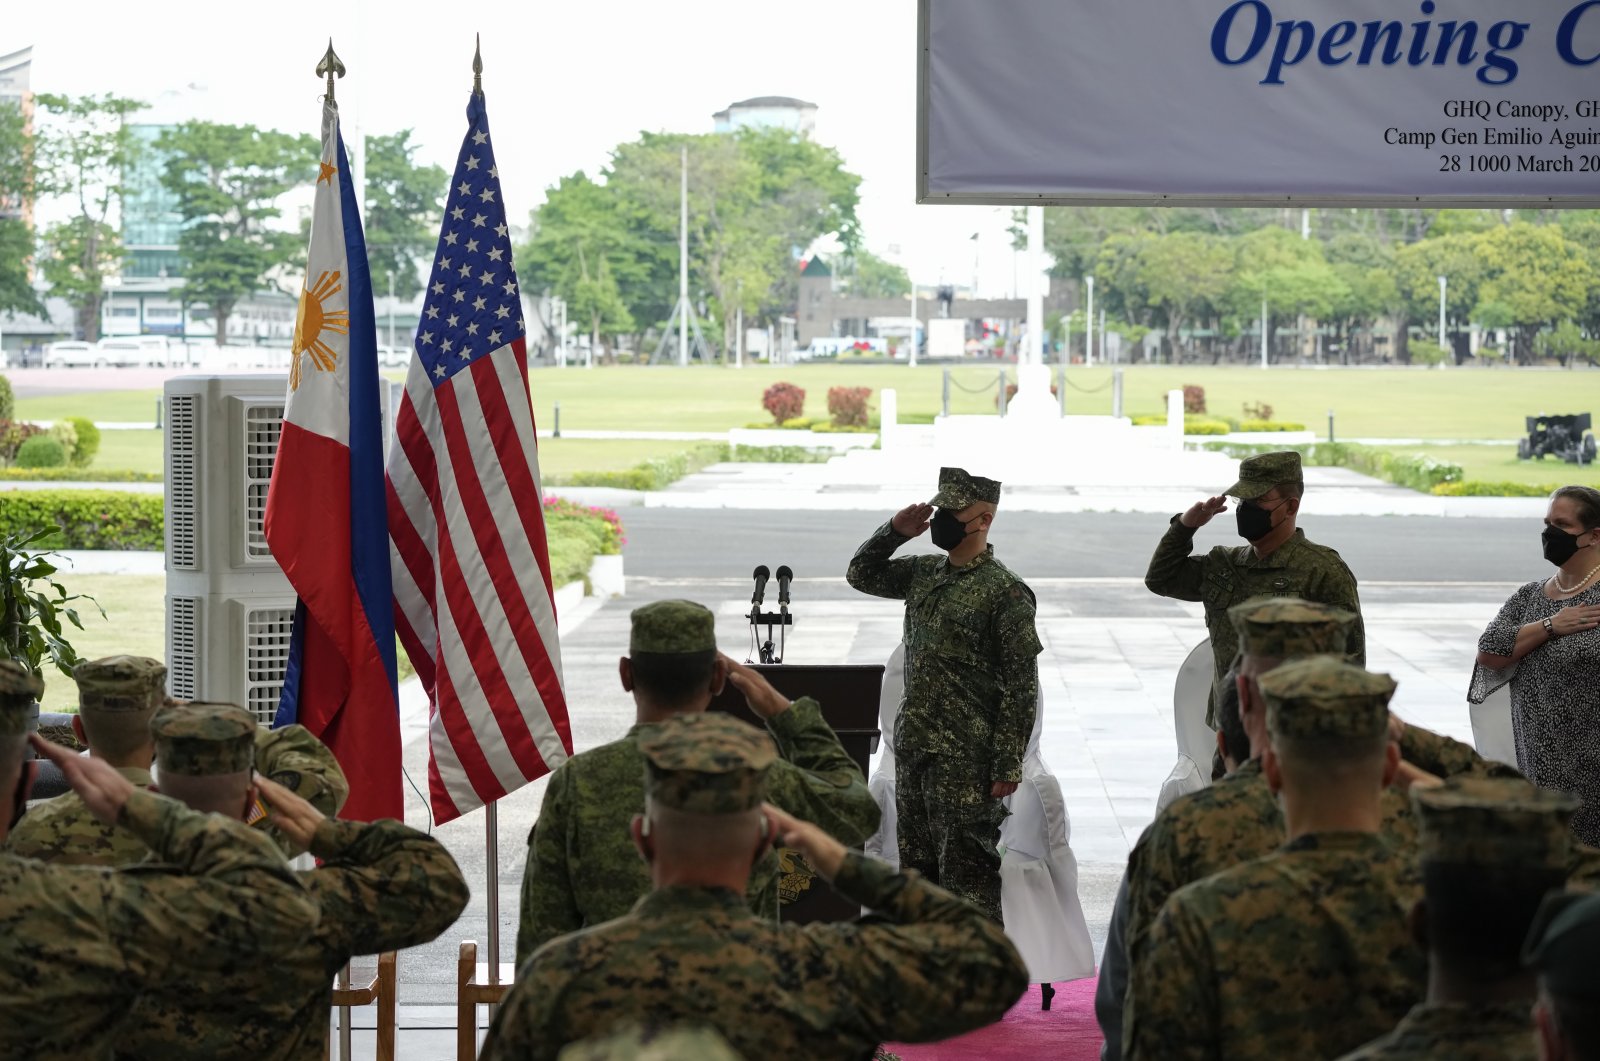 Philippine and U.S. soldiers salute to their flags as the national anthem is played during opening ceremonies of the &quot;Balikatan&quot; or &quot;Shoulder to Shoulder&quot; joint military exercises at Camp Aguinaldo, Quezon City, Philippines, March 28, 2022. (AP Photo)